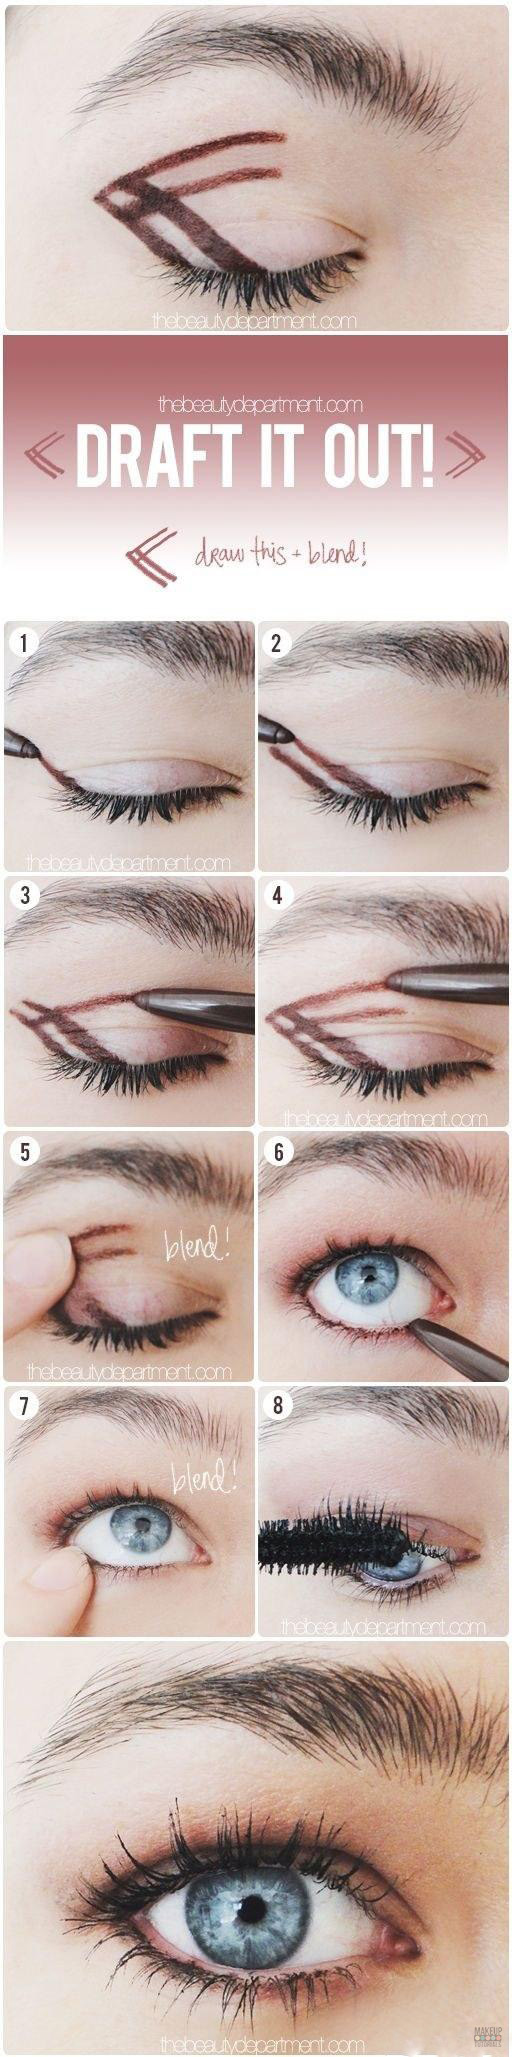 cosmetic tips and tricks, beauty tips and tricks, makeup tips and tricks, beauty tricks, diy beauty tips, make up tricks, beauty diy, easy makeup tips, diy tips, beauty tip, make up tricks, home beauty remedies, makeup and beauty, crazy tricks, at home beauty remedies